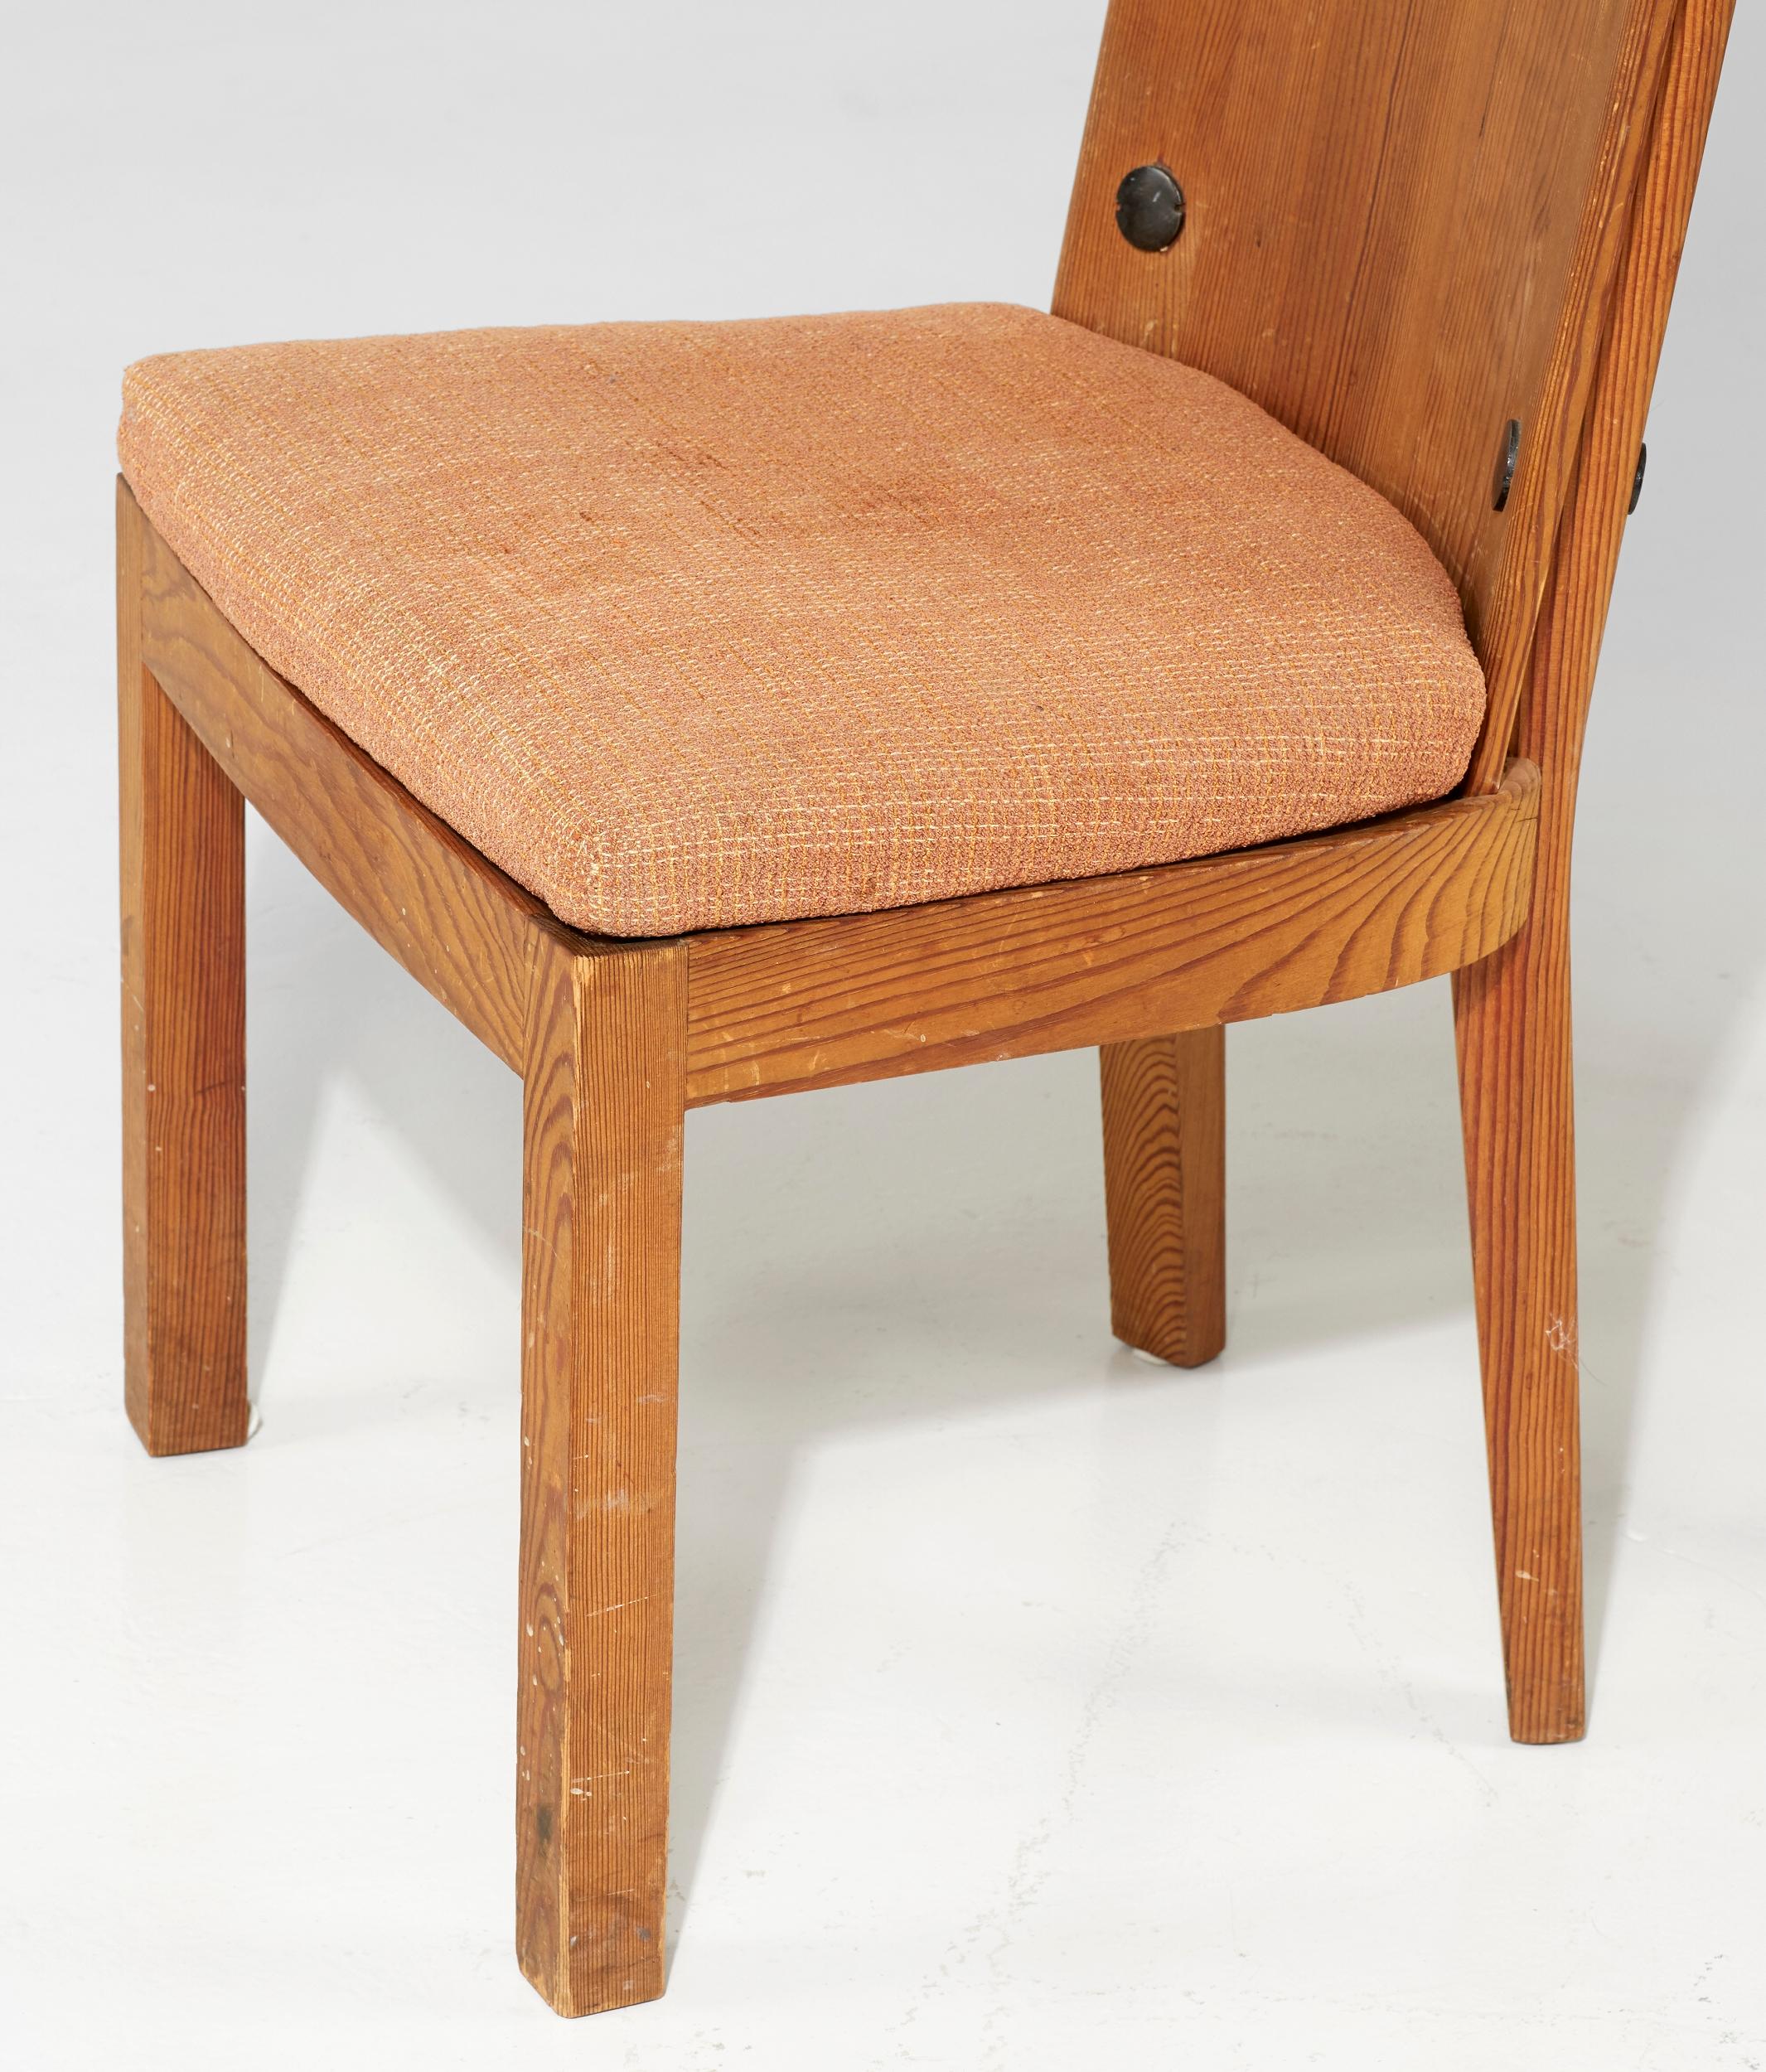 Scandinavian Modern Axel Einar Hjorth, pair of Lovo Chairs, Sweden, 1930s For Sale